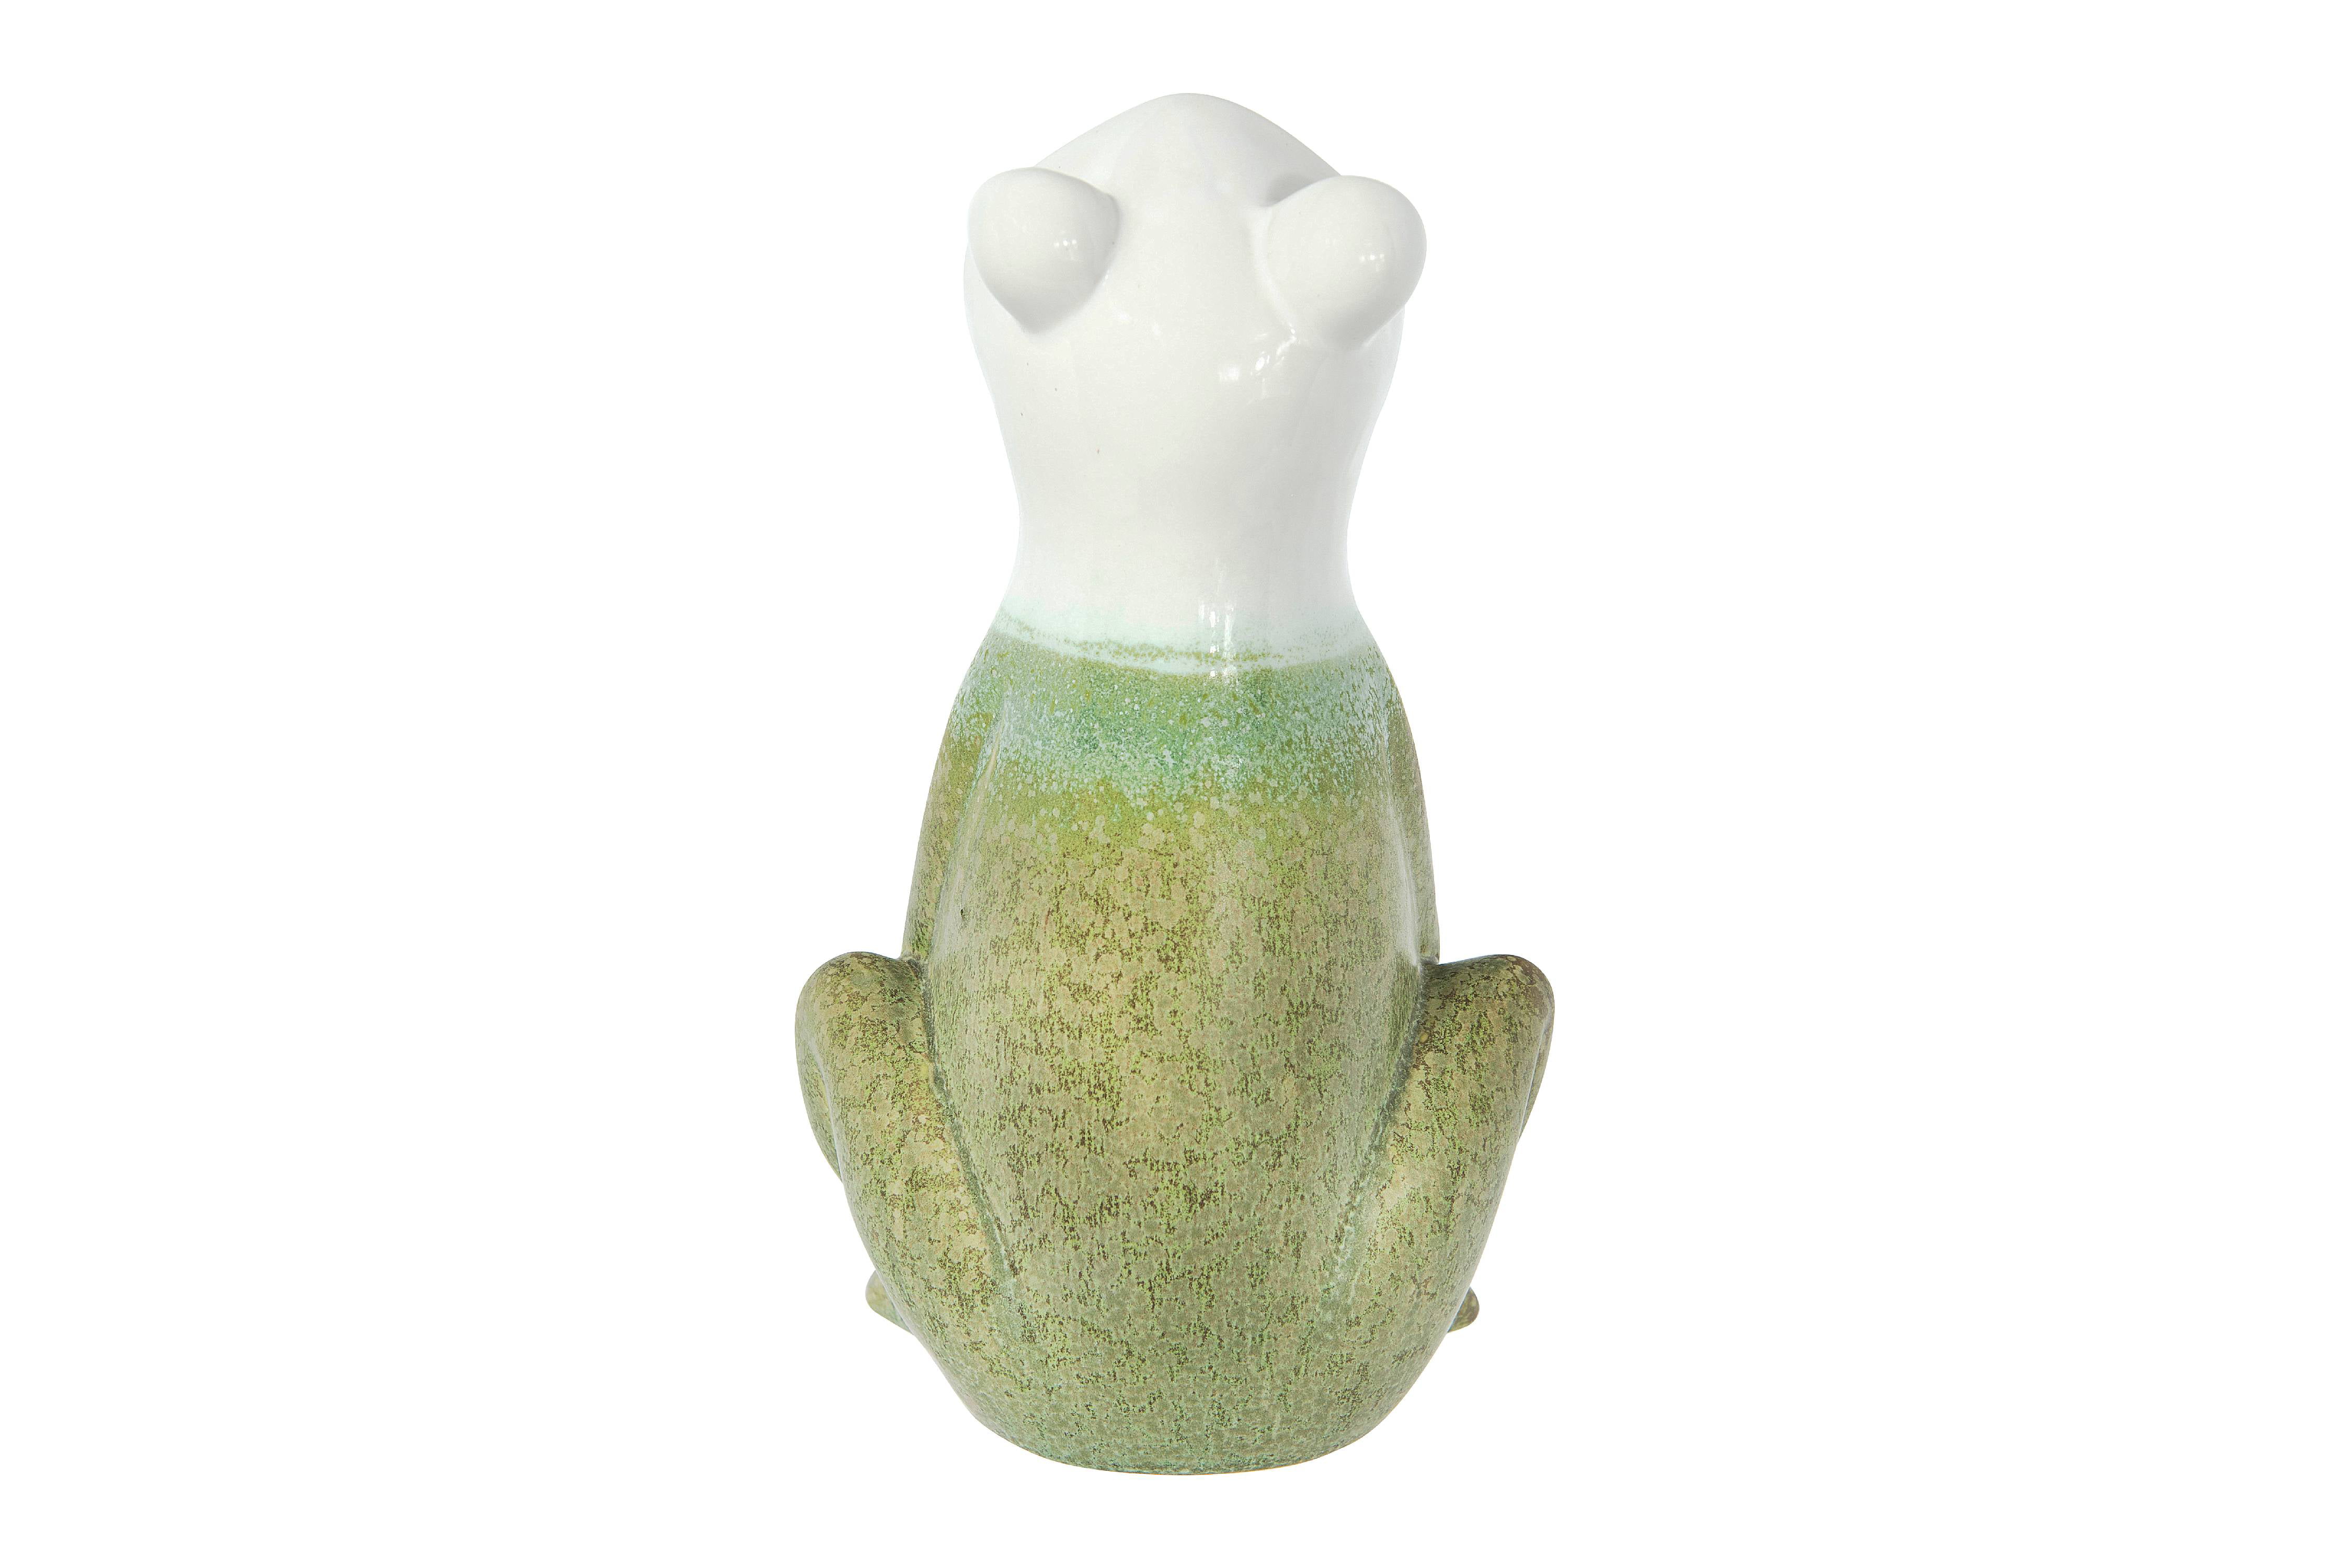 New ~ Ceramic Frog Shape Bank ~ Green Lt Green and White 